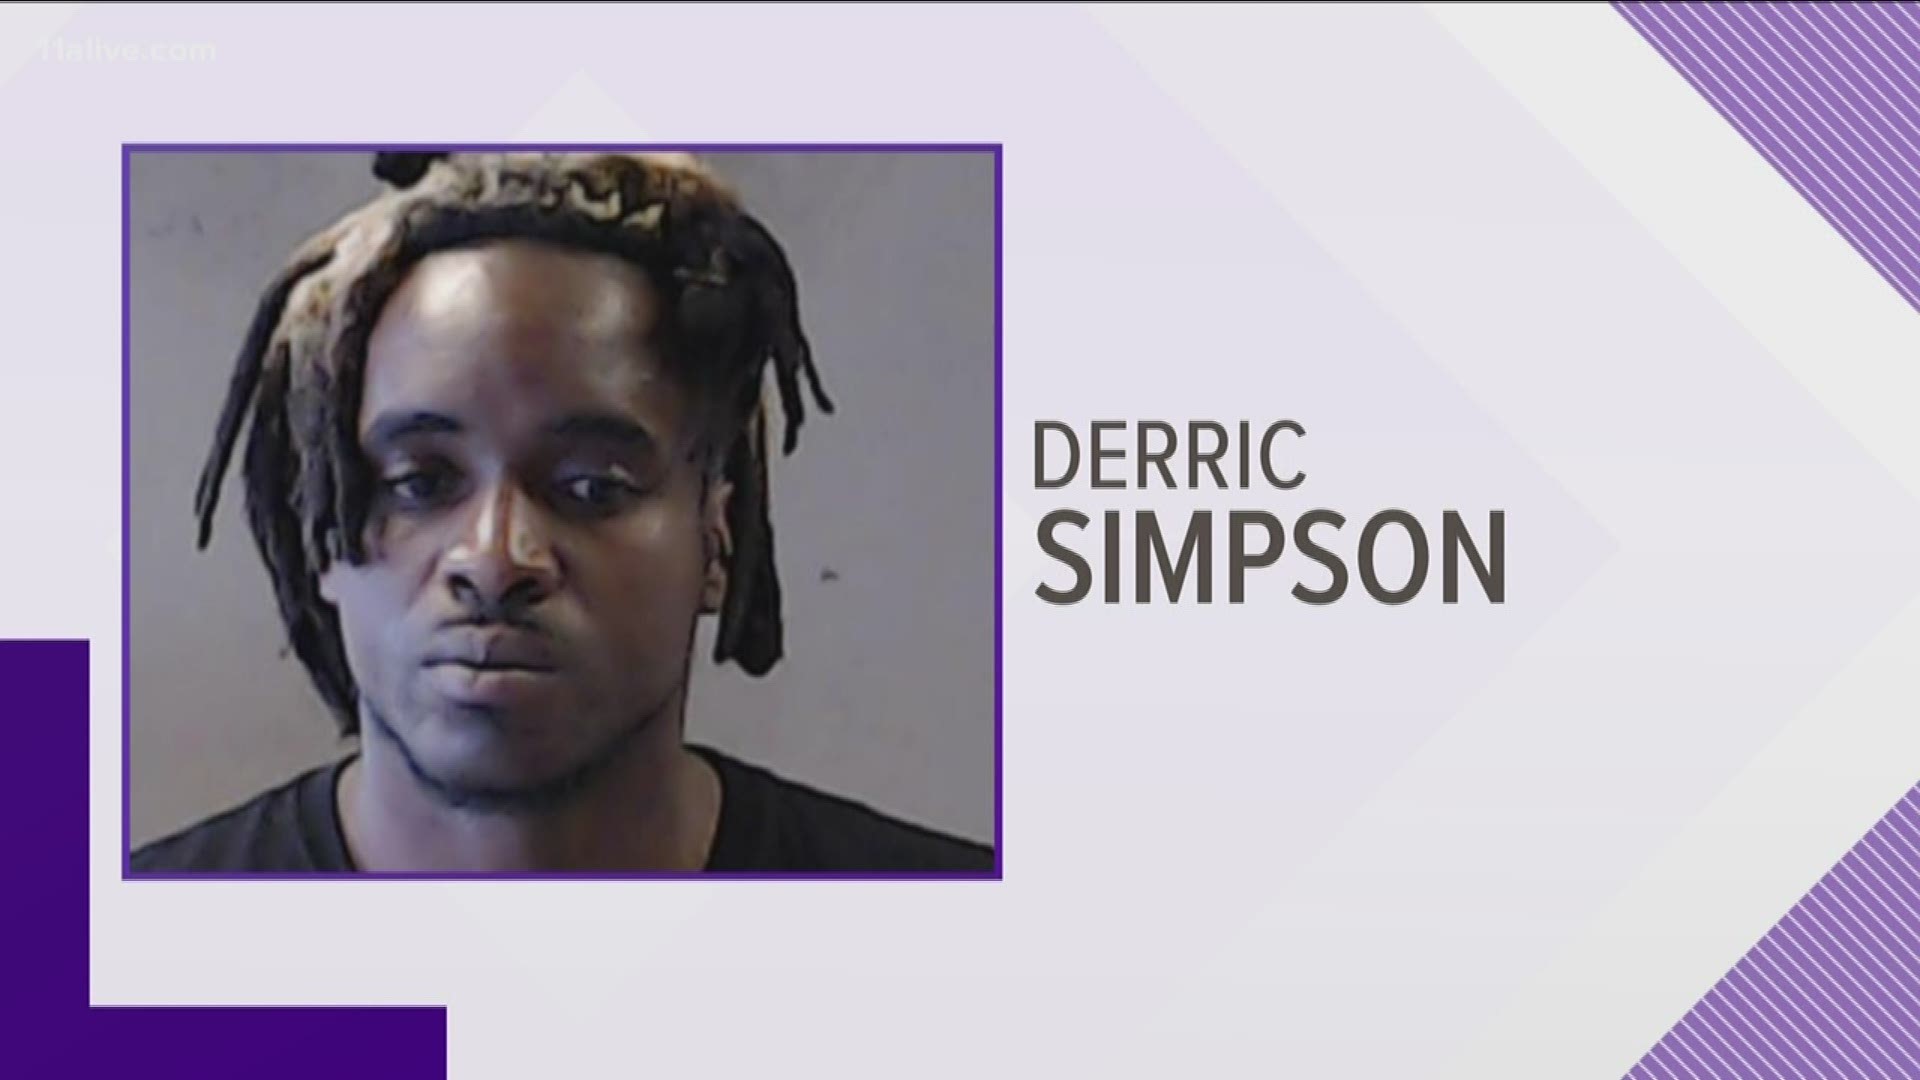 Derric Simpson was initially pulled over for using his cell phone while driving.